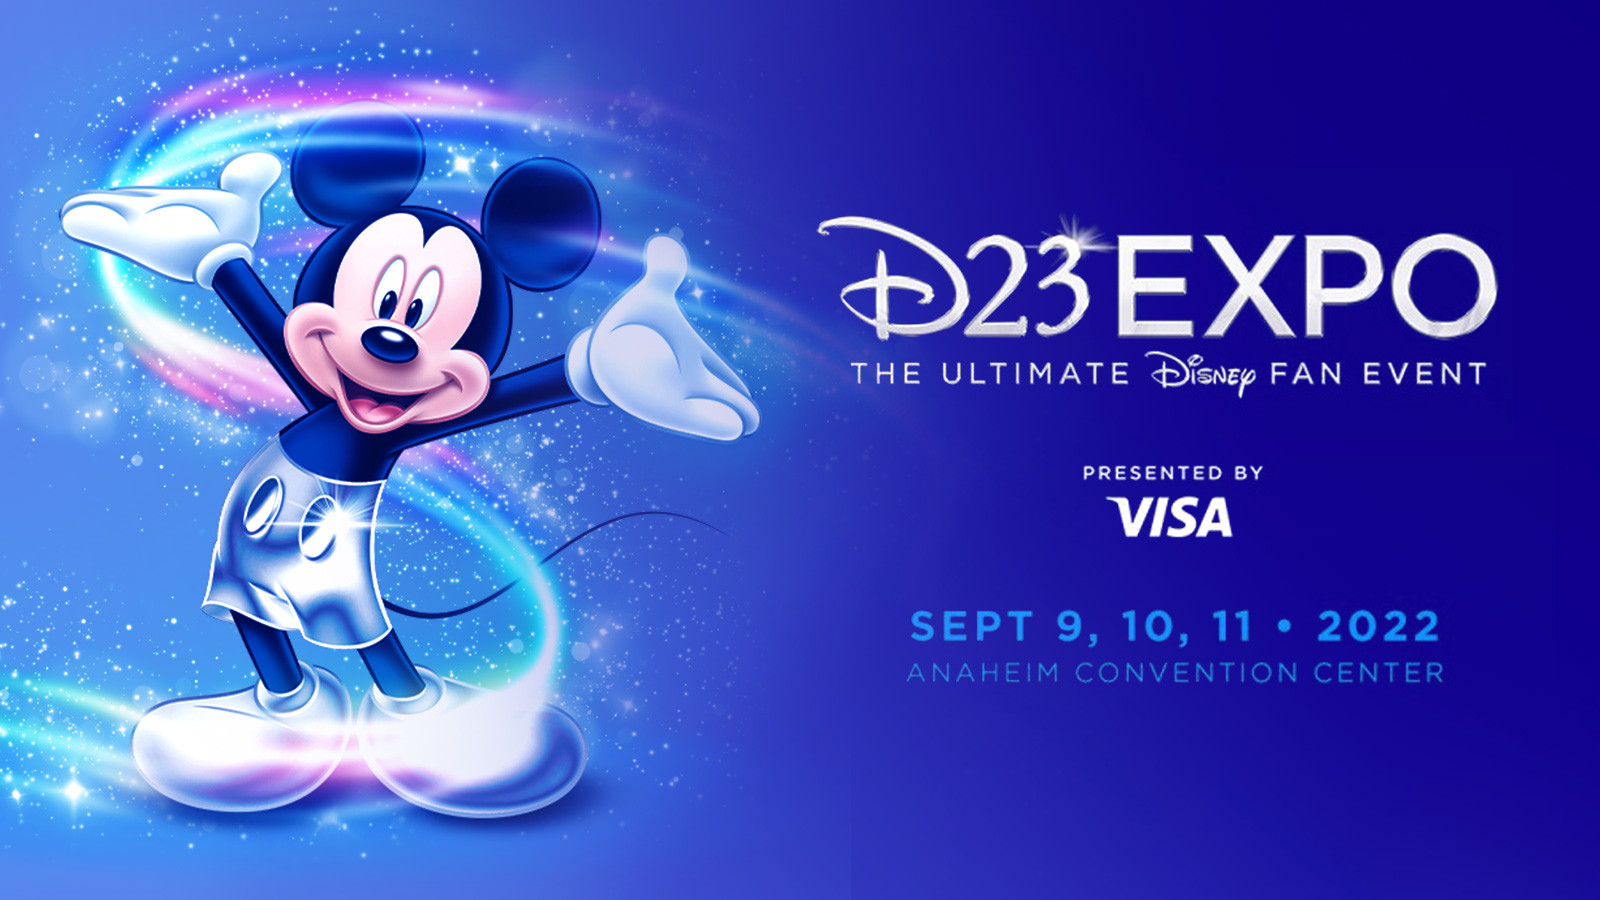 Big Names Confirmed To Attend Disney Branded Television Panel At D23 Expo 2022